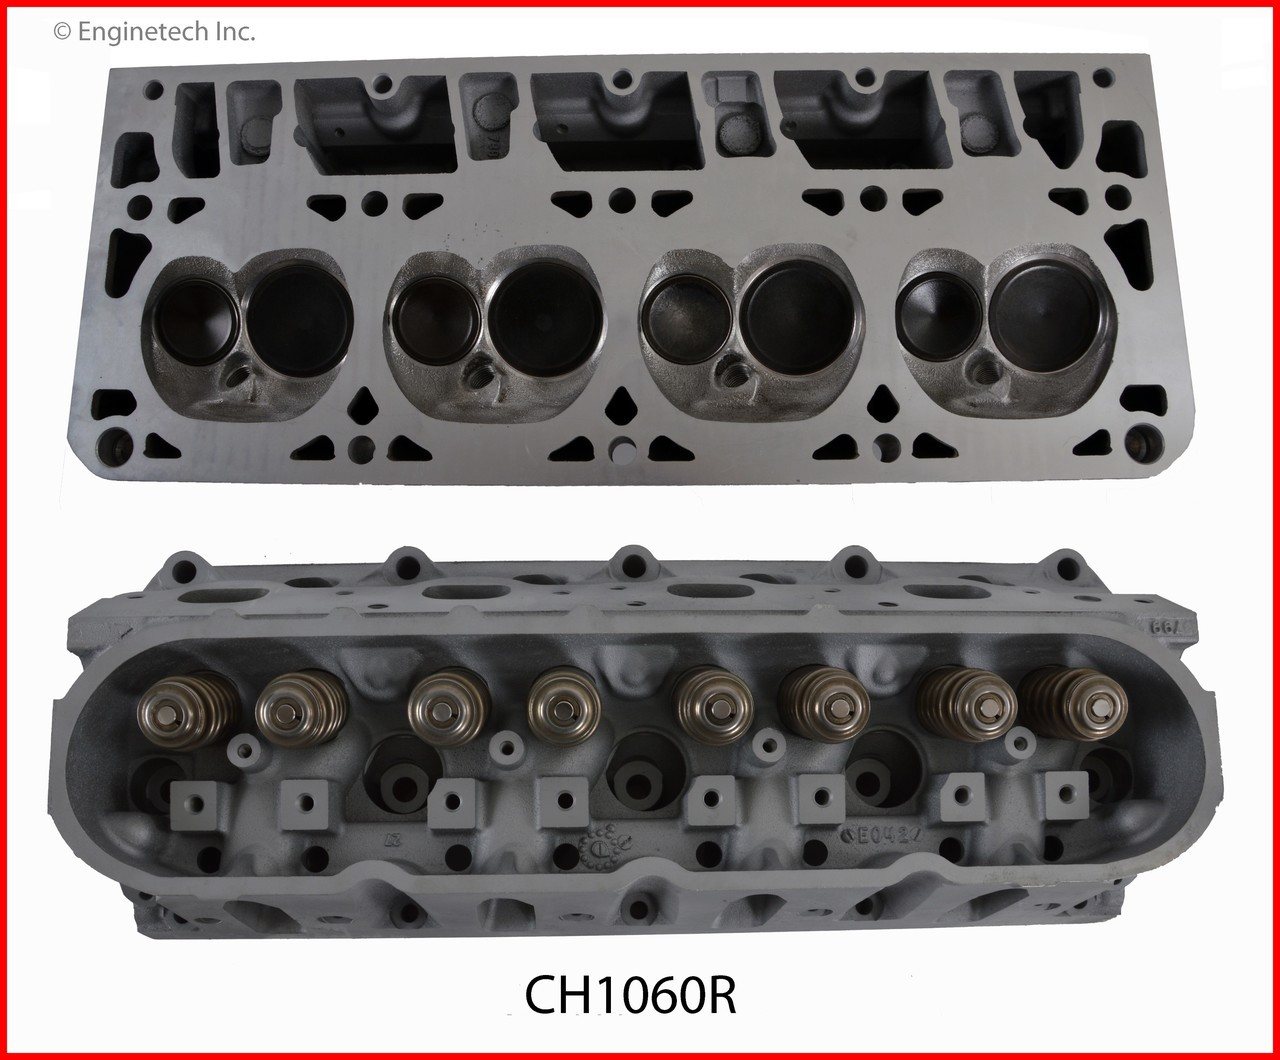 Cylinder Head Assembly - 2007 Chevrolet Monte Carlo 5.3L (CH1060R.K145)